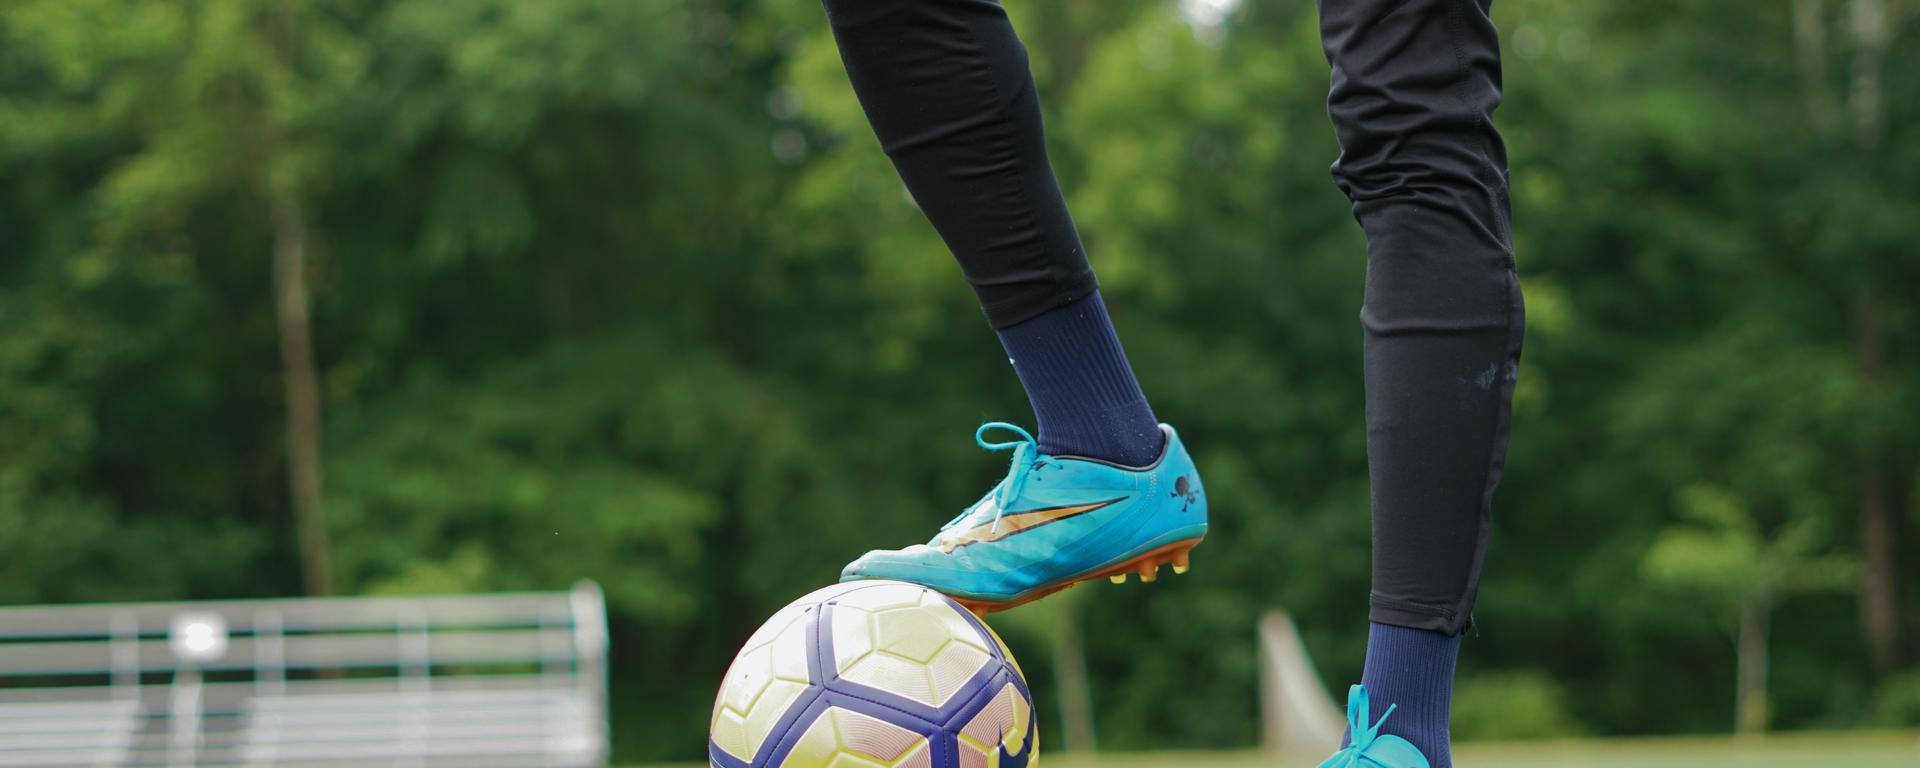 Soccer athlete with ball at feet